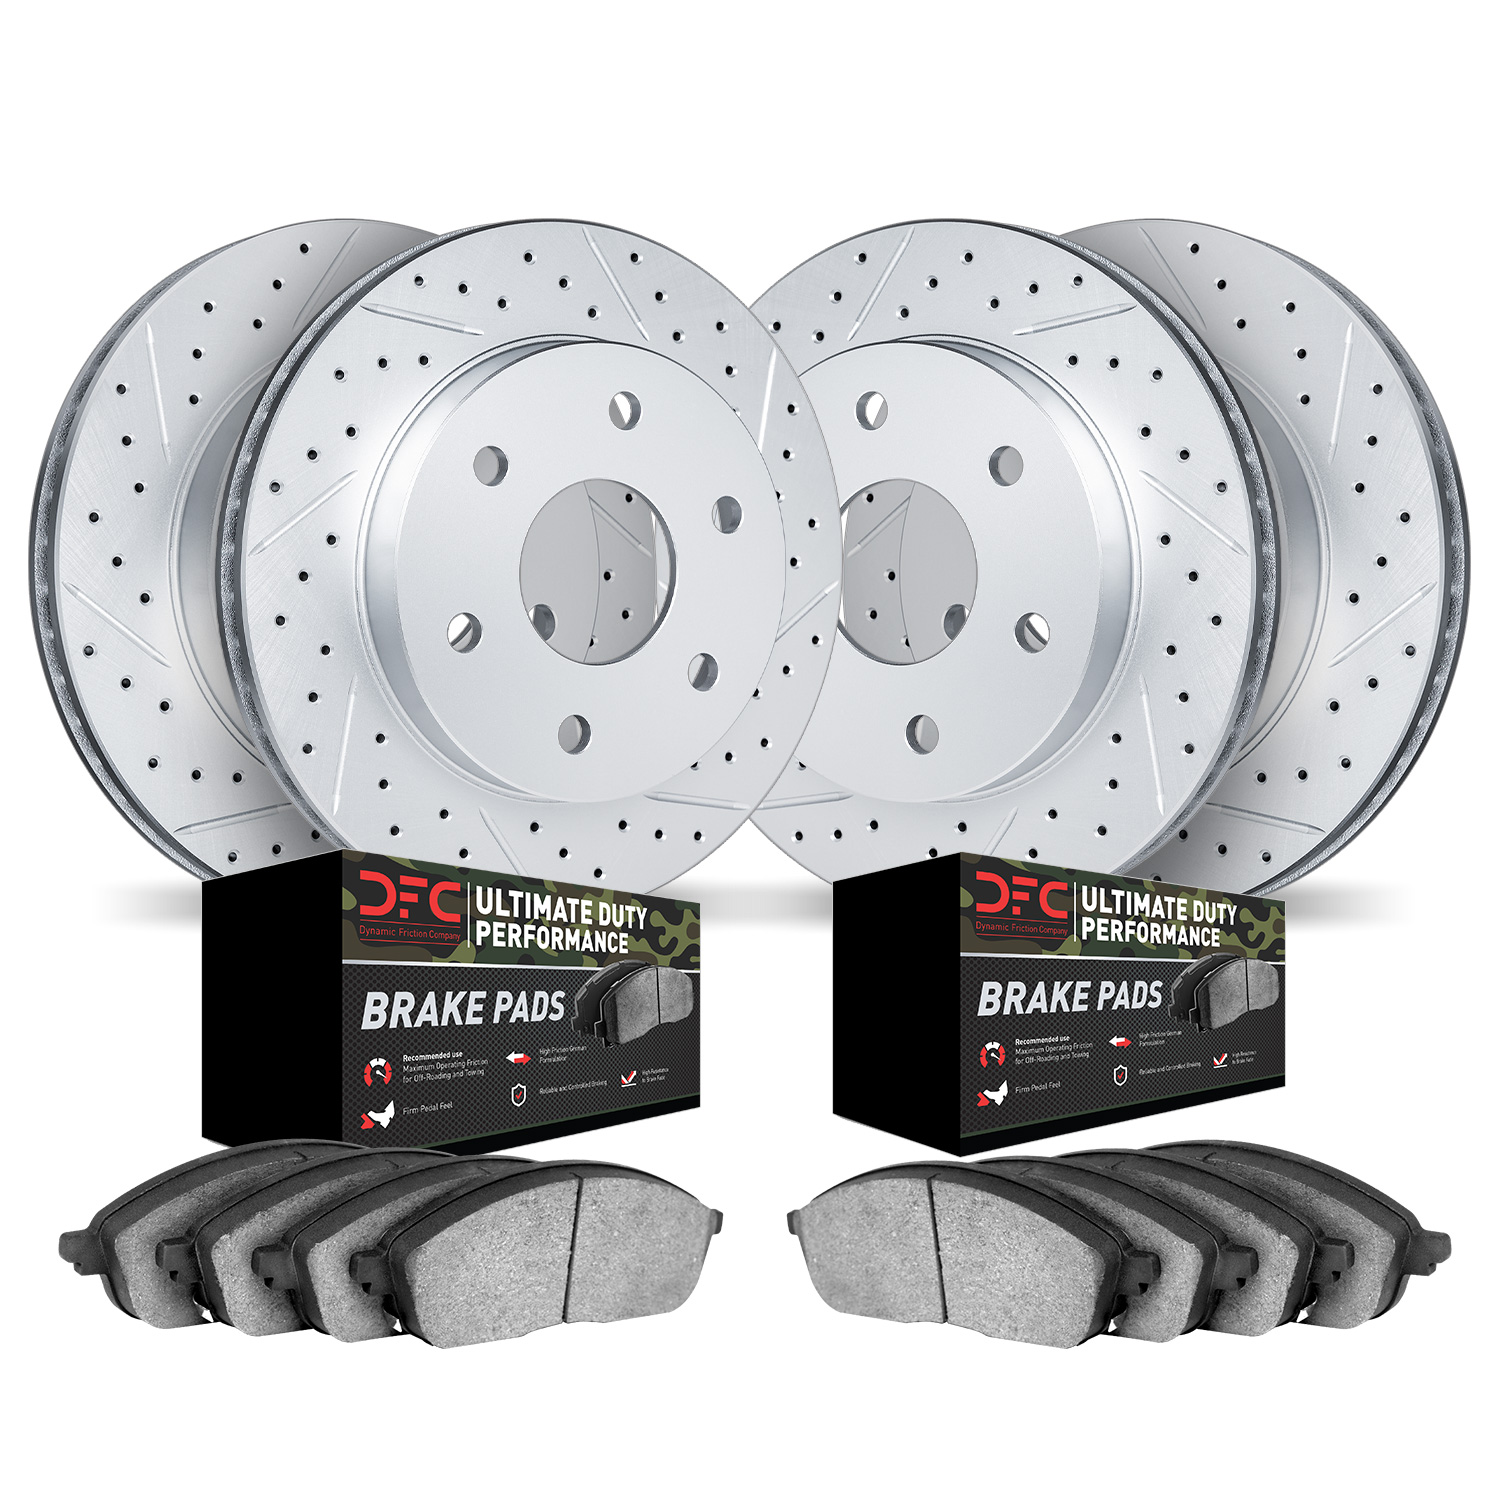 2404-67005 Geoperformance Drilled/Slotted Brake Rotors with Ultimate-Duty Brake Pads Kit, Fits Select Infiniti/Nissan, Position: